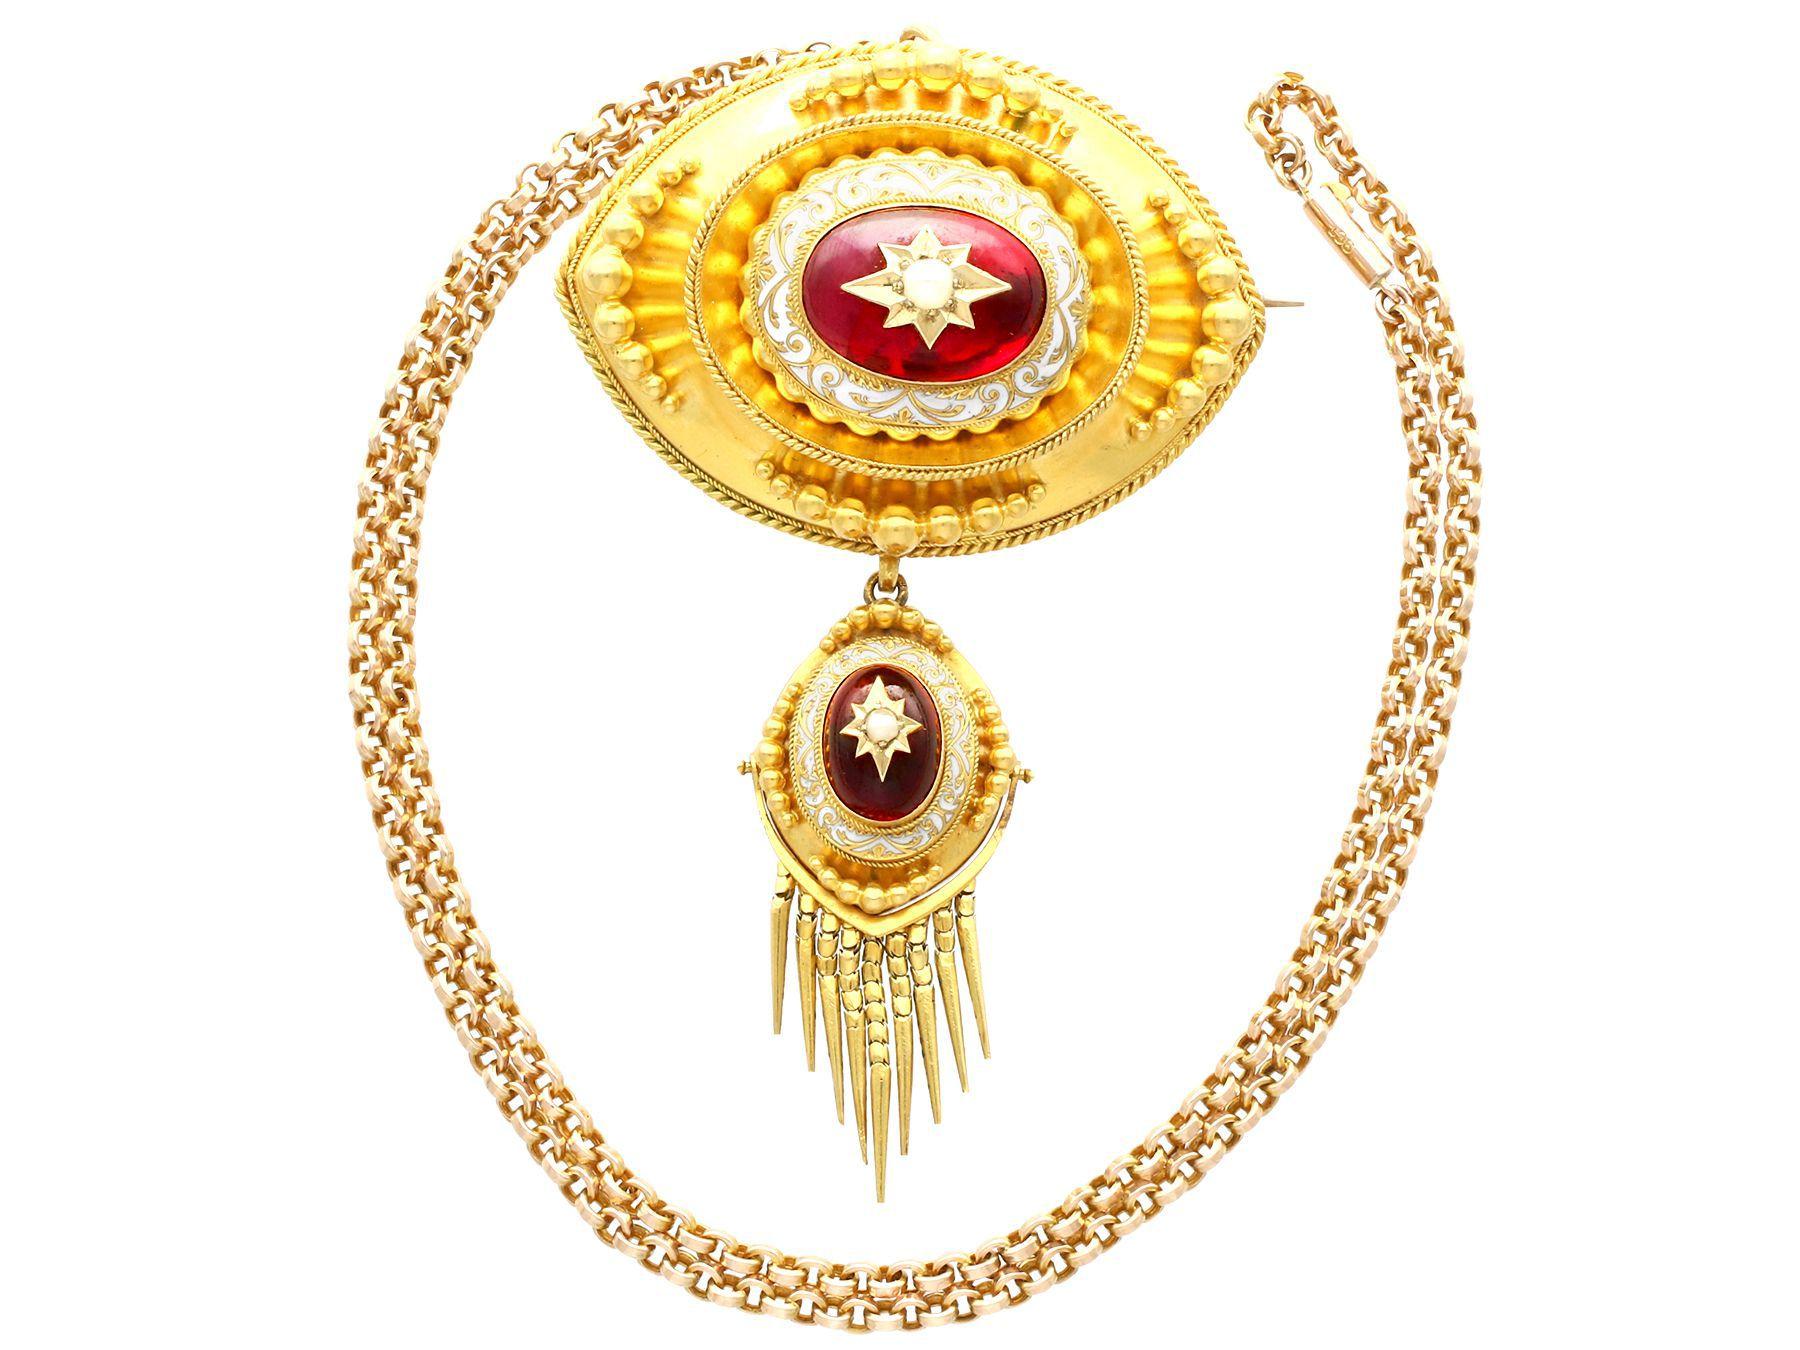 Cabochon Antique 6.20 Carat Garnet Pearl and Enamel Yellow Gold Pendant / Brooch For Sale